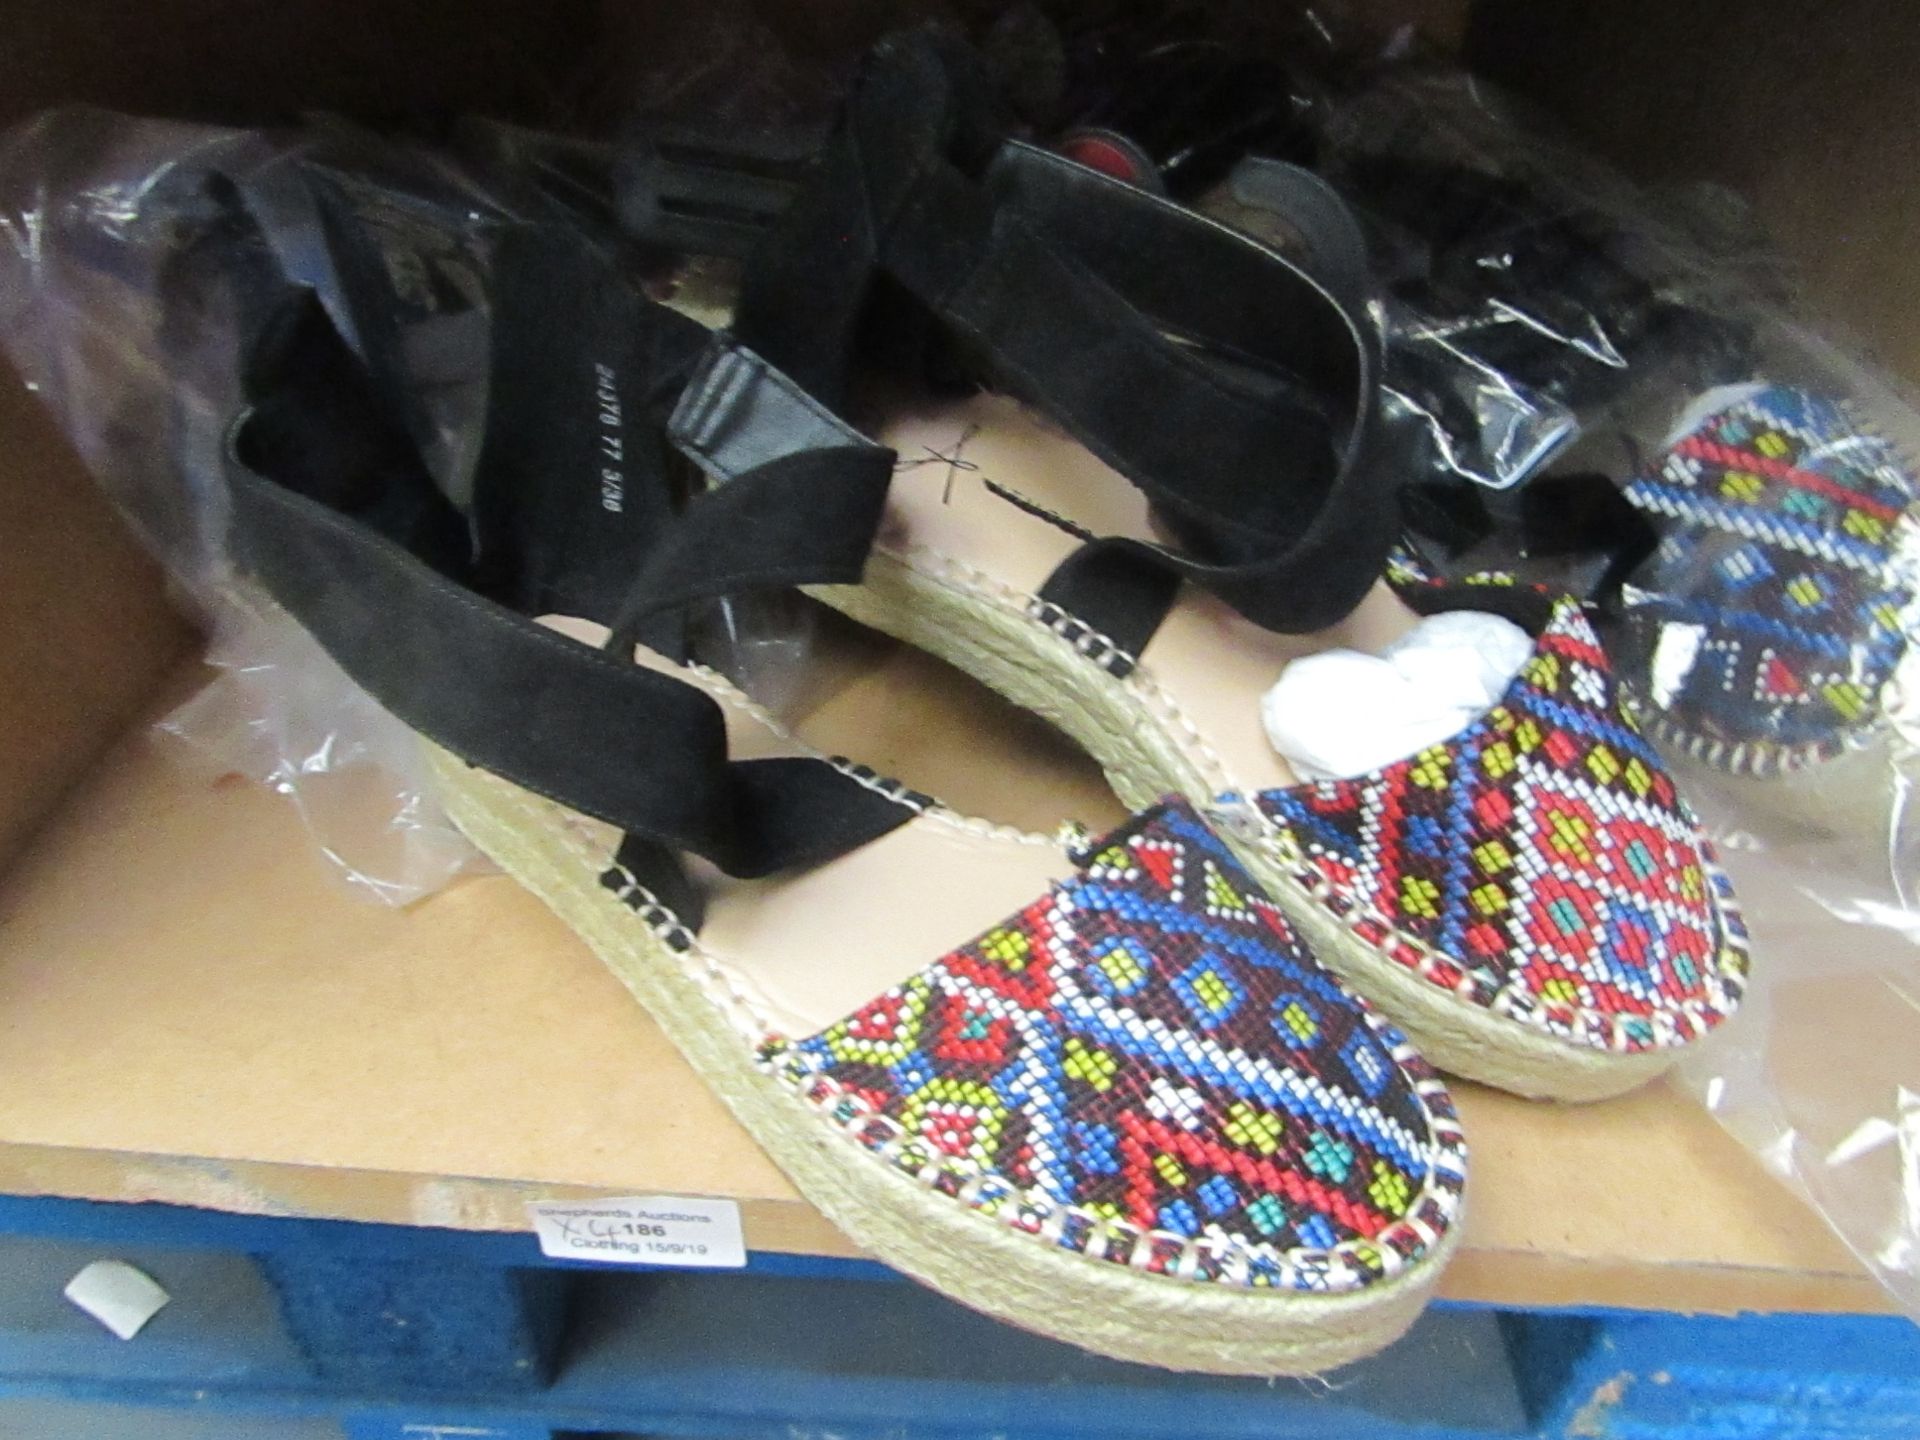 4 x Pairs of Ladies Espadrilles Size 8 Shoes.See Pic for Design.New & Packaged